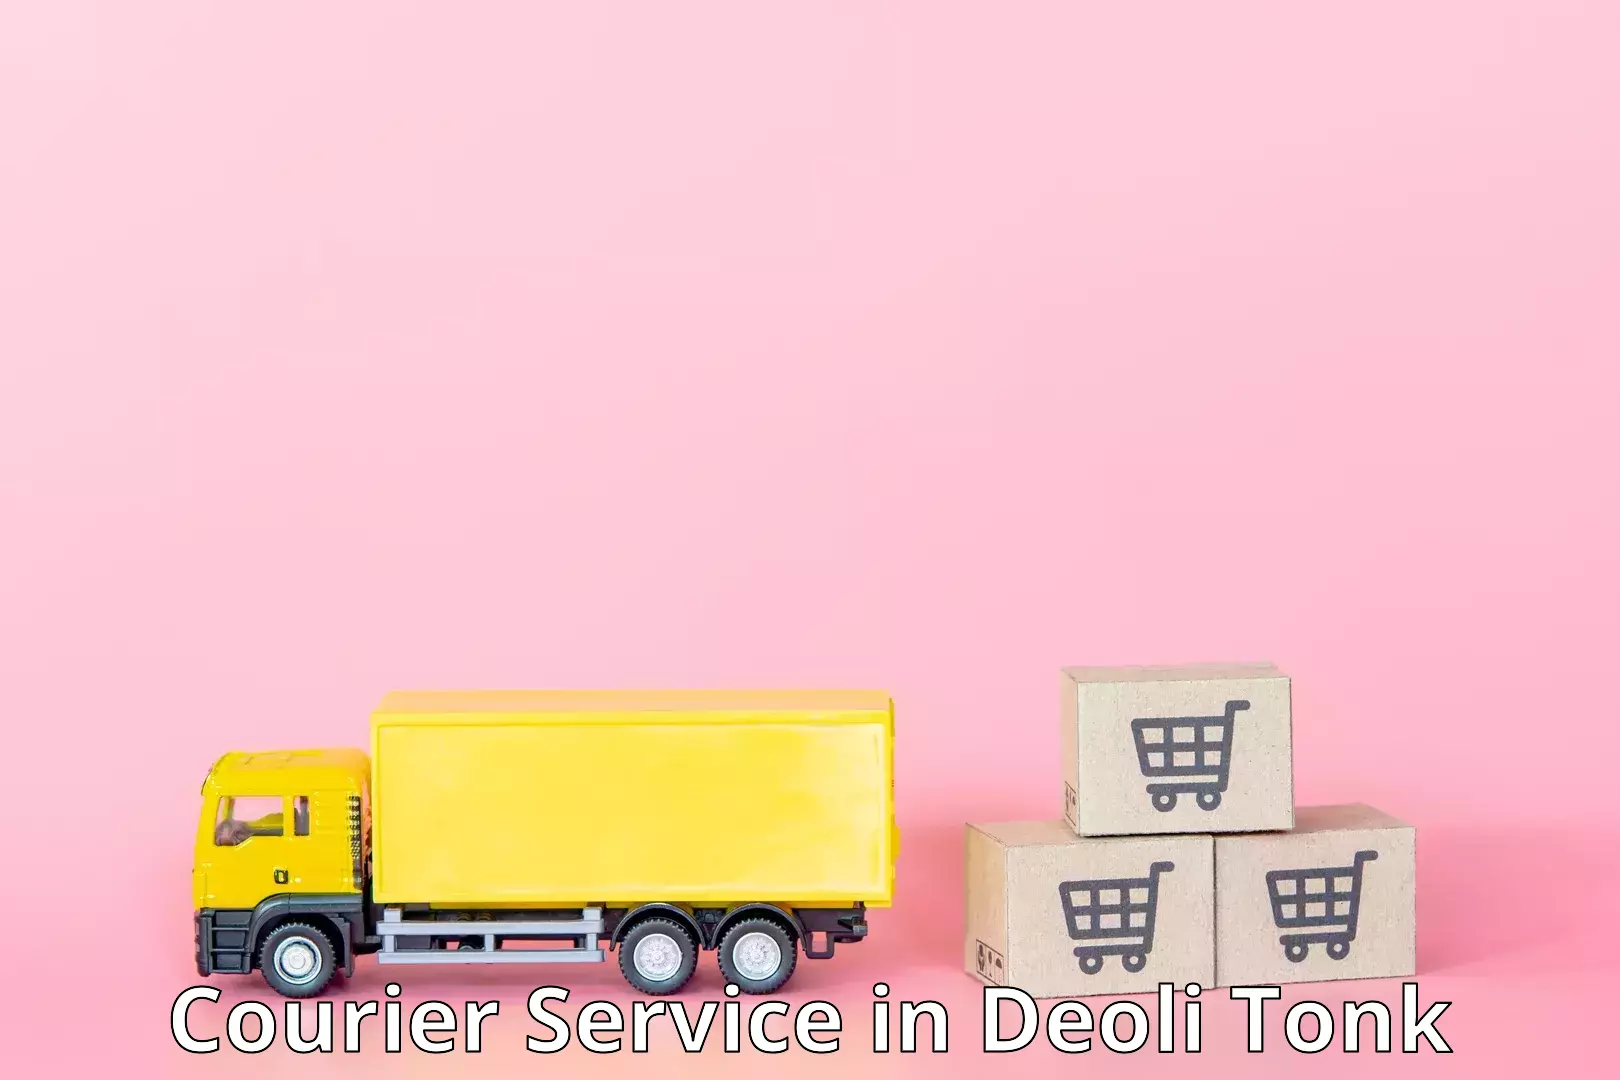 Sustainable delivery practices in Deoli Tonk